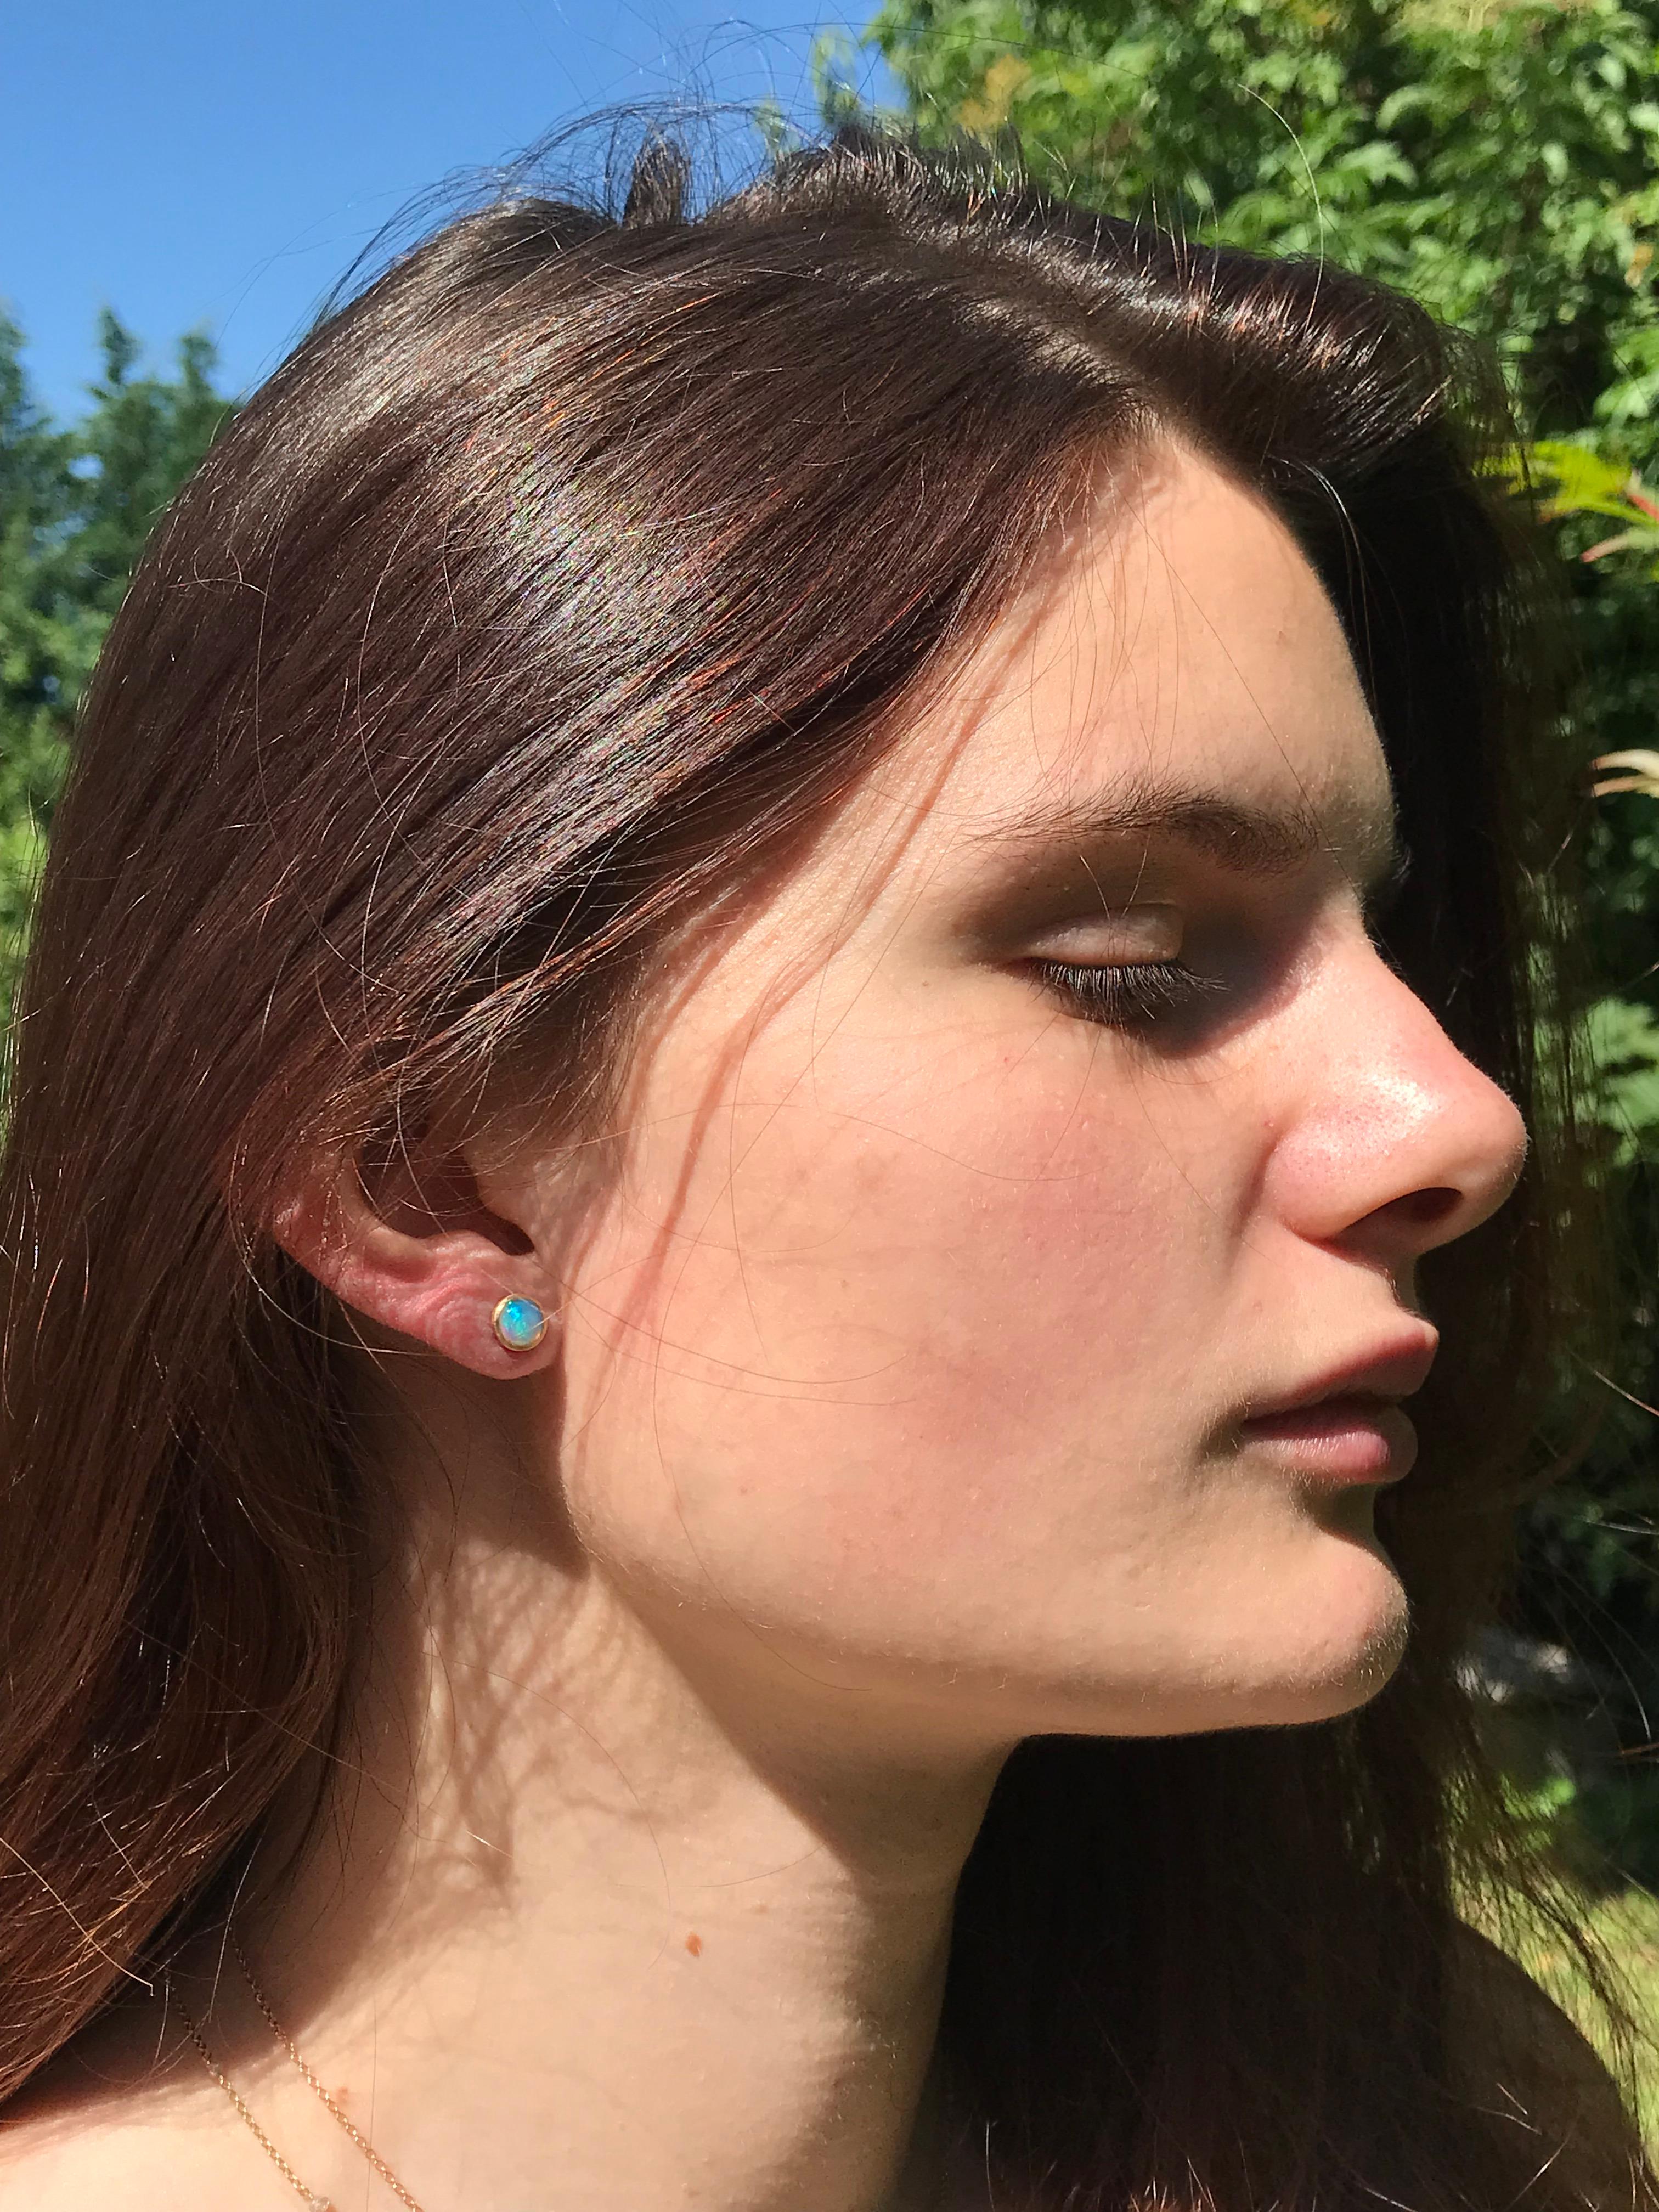 Dalben design  18k yellow gold matte finishing stud earrings with two bezel-set round cabochon blue Australian solid opals weight 1,08 carats . 
Bezel stone dimensions  7 mm .
The earrings has been designed and handcrafted in our atelier in Como